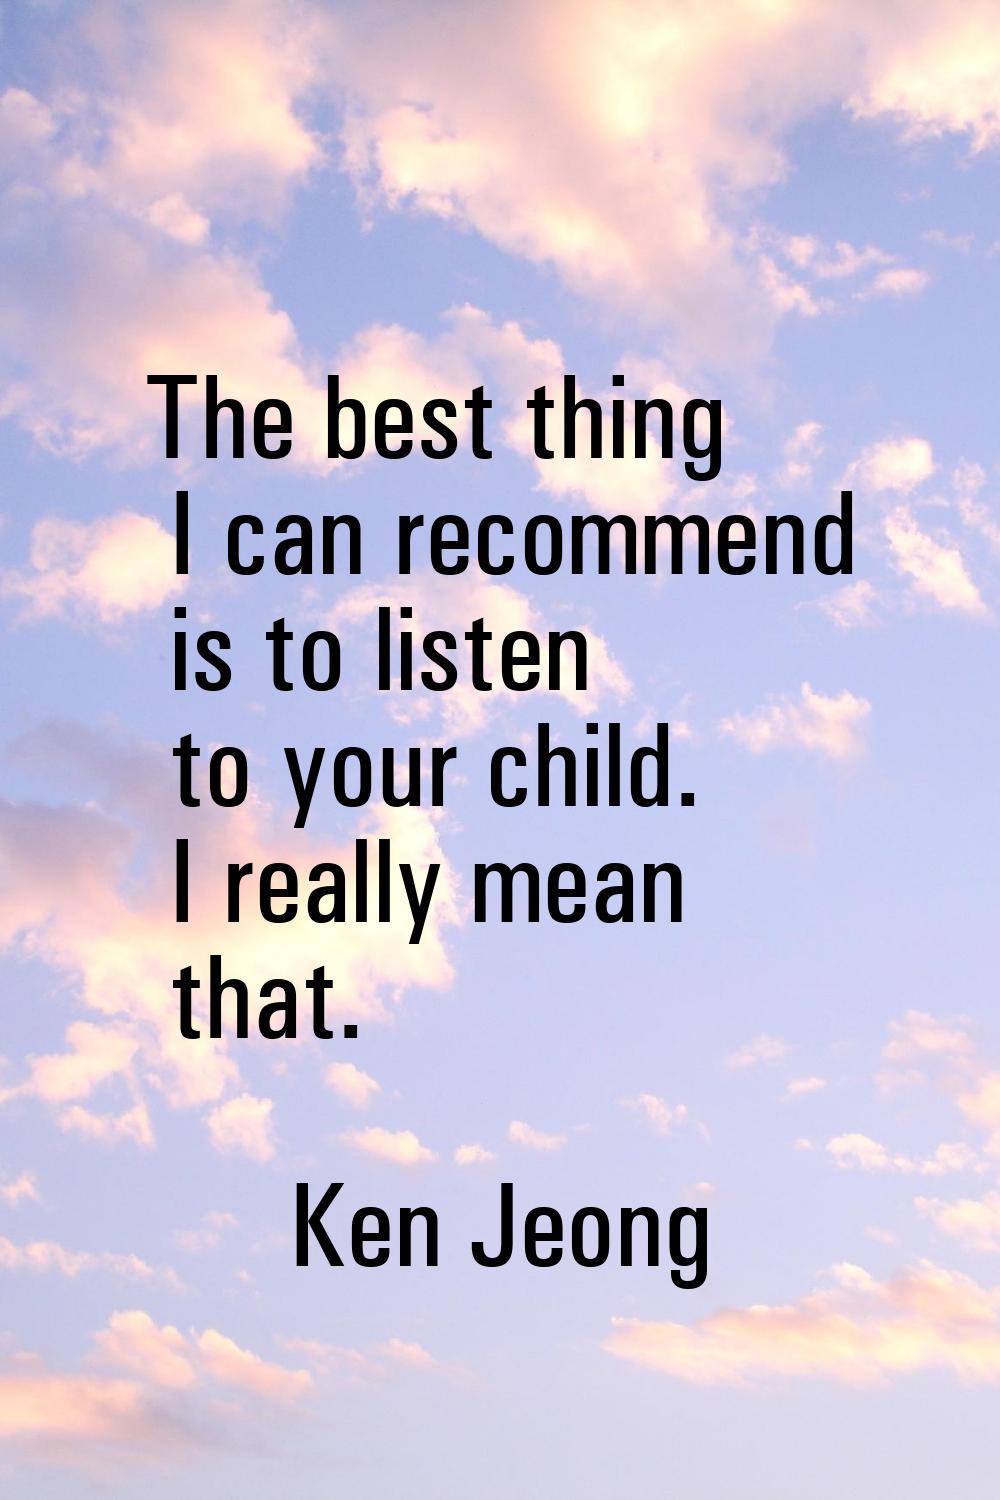 The best thing I can recommend is to listen to your child. I really mean that.